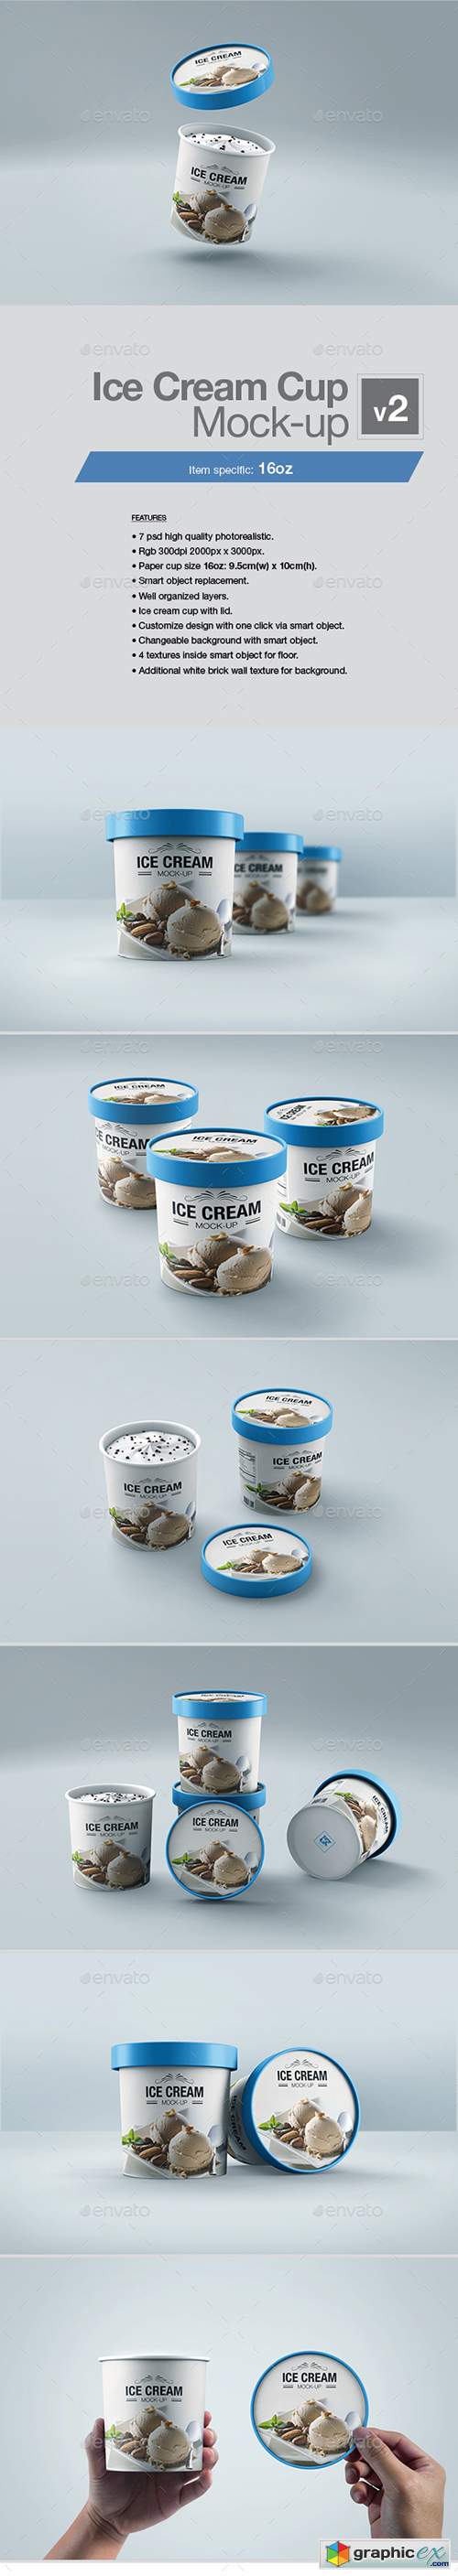 Ice Cream Cup Mock-up v2